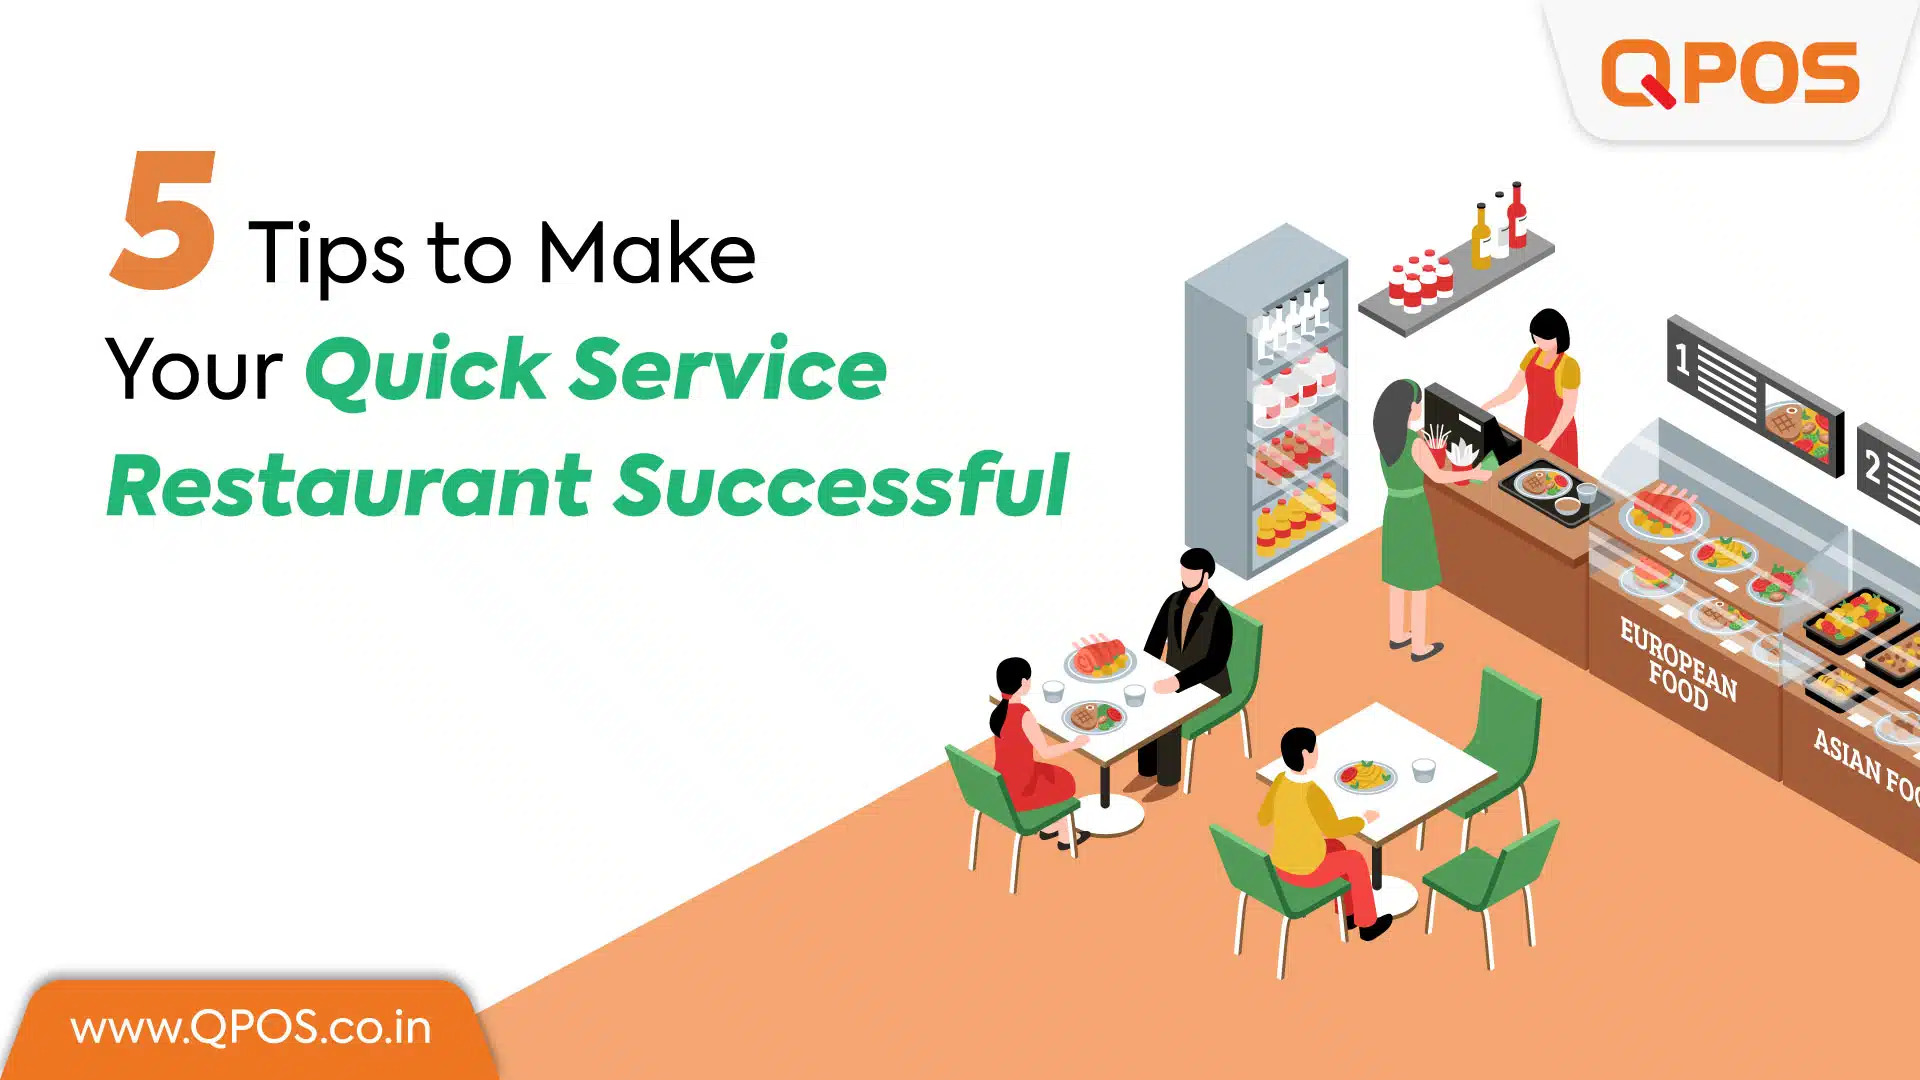 QPOS-5-Tips-to-Make-Your-Quick-Service-Restaurant-Successful.jpg